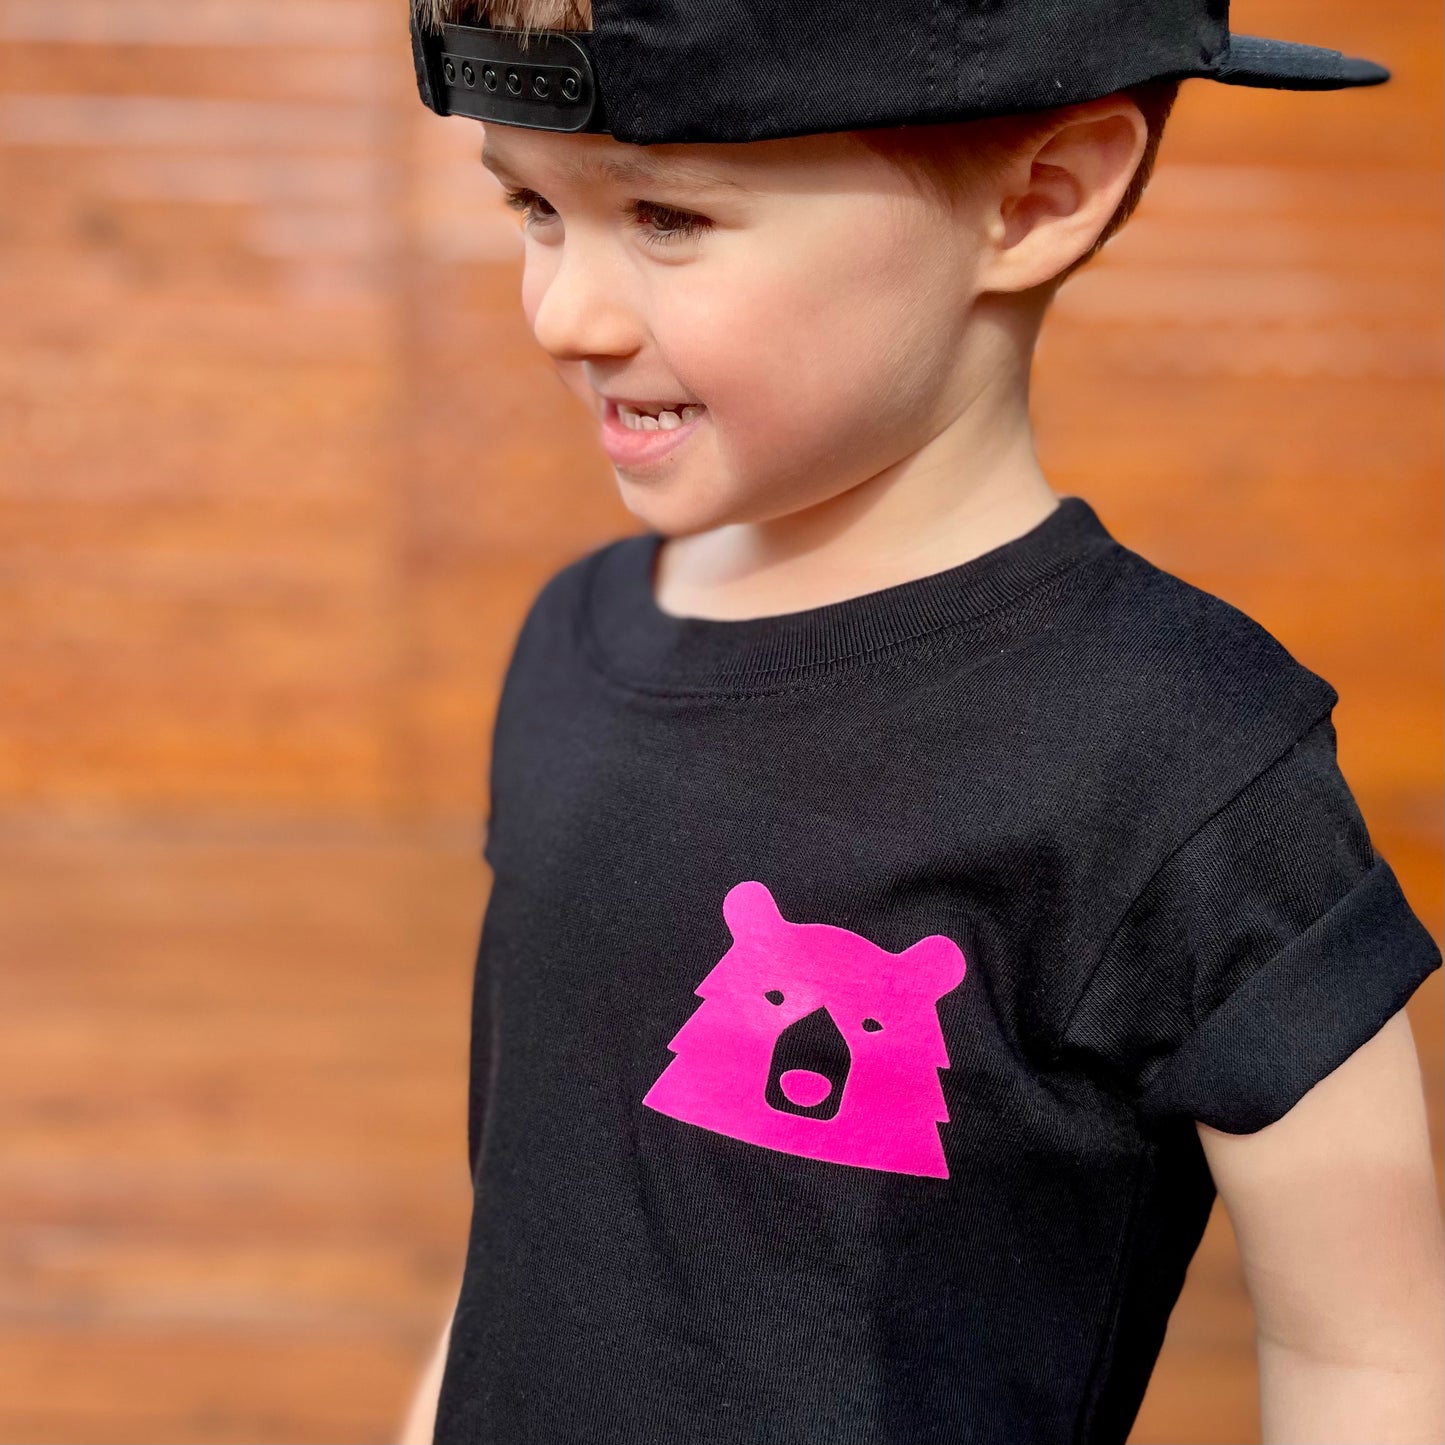 Kids Mascot Tee - Black with Hot Pink